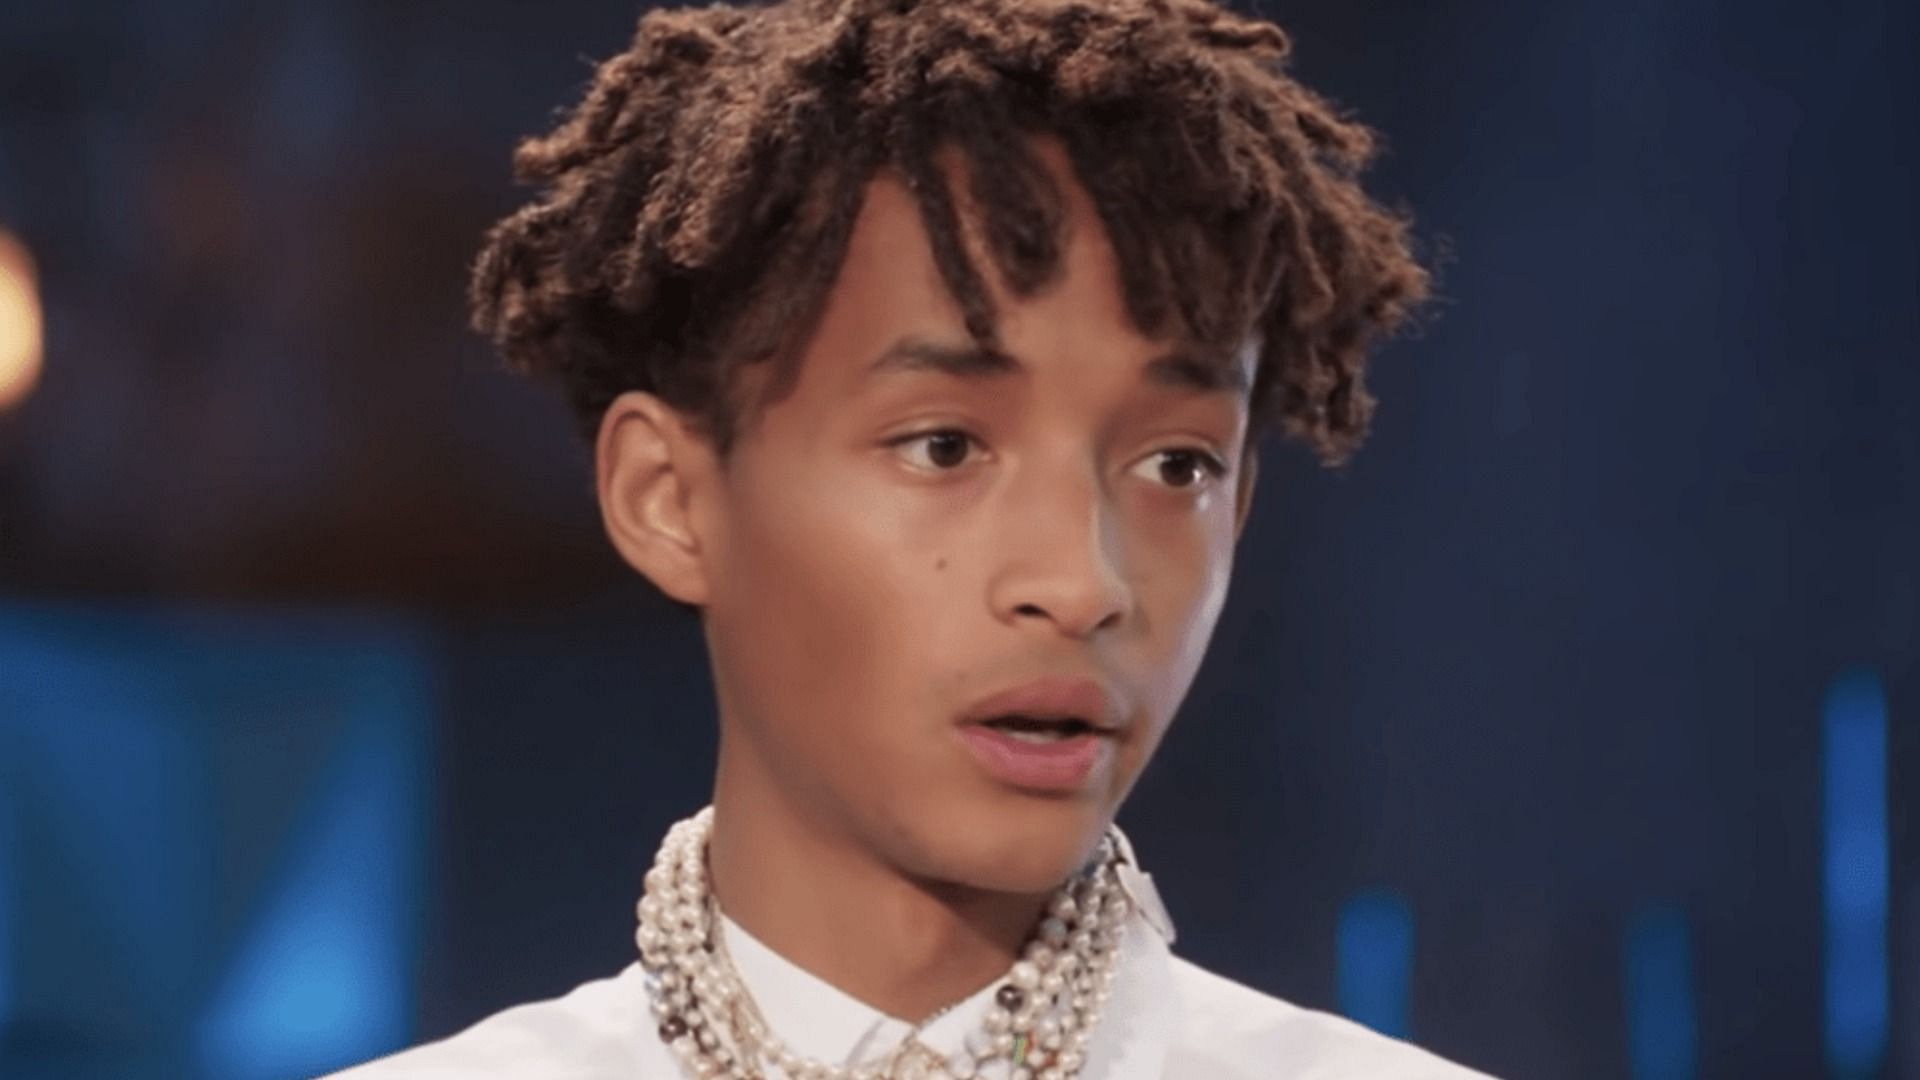 Jaden Smith gets trolled online after dissing people of his generation (Image via Red Table Talk/YouTube)